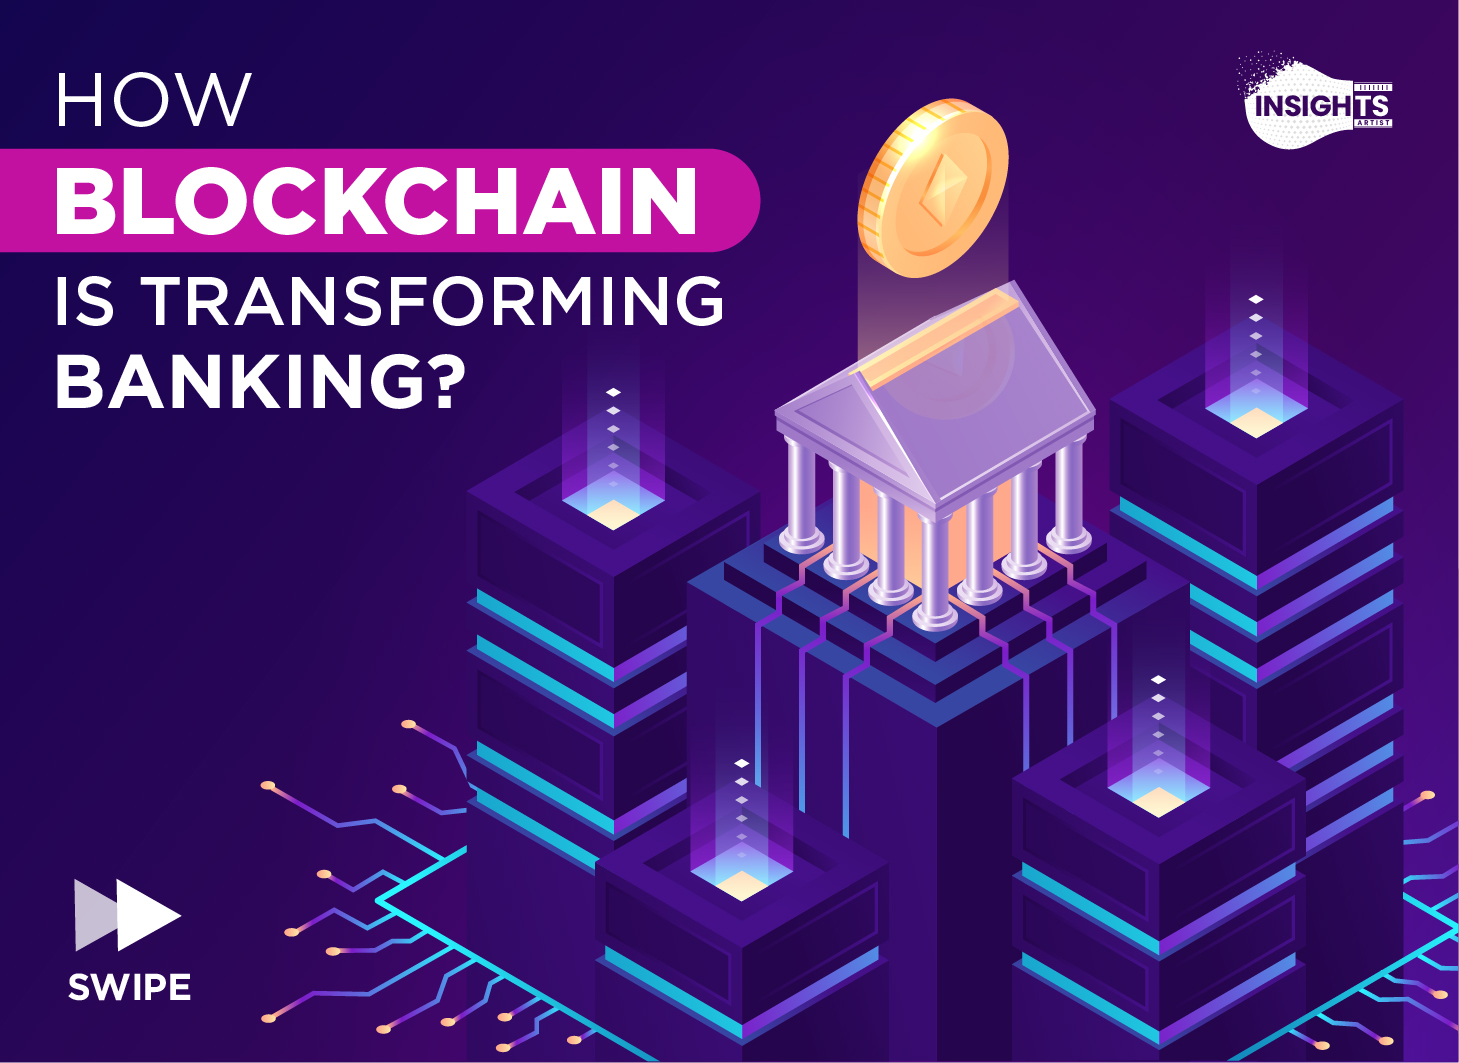 How Blockchain is Transforming Banking?